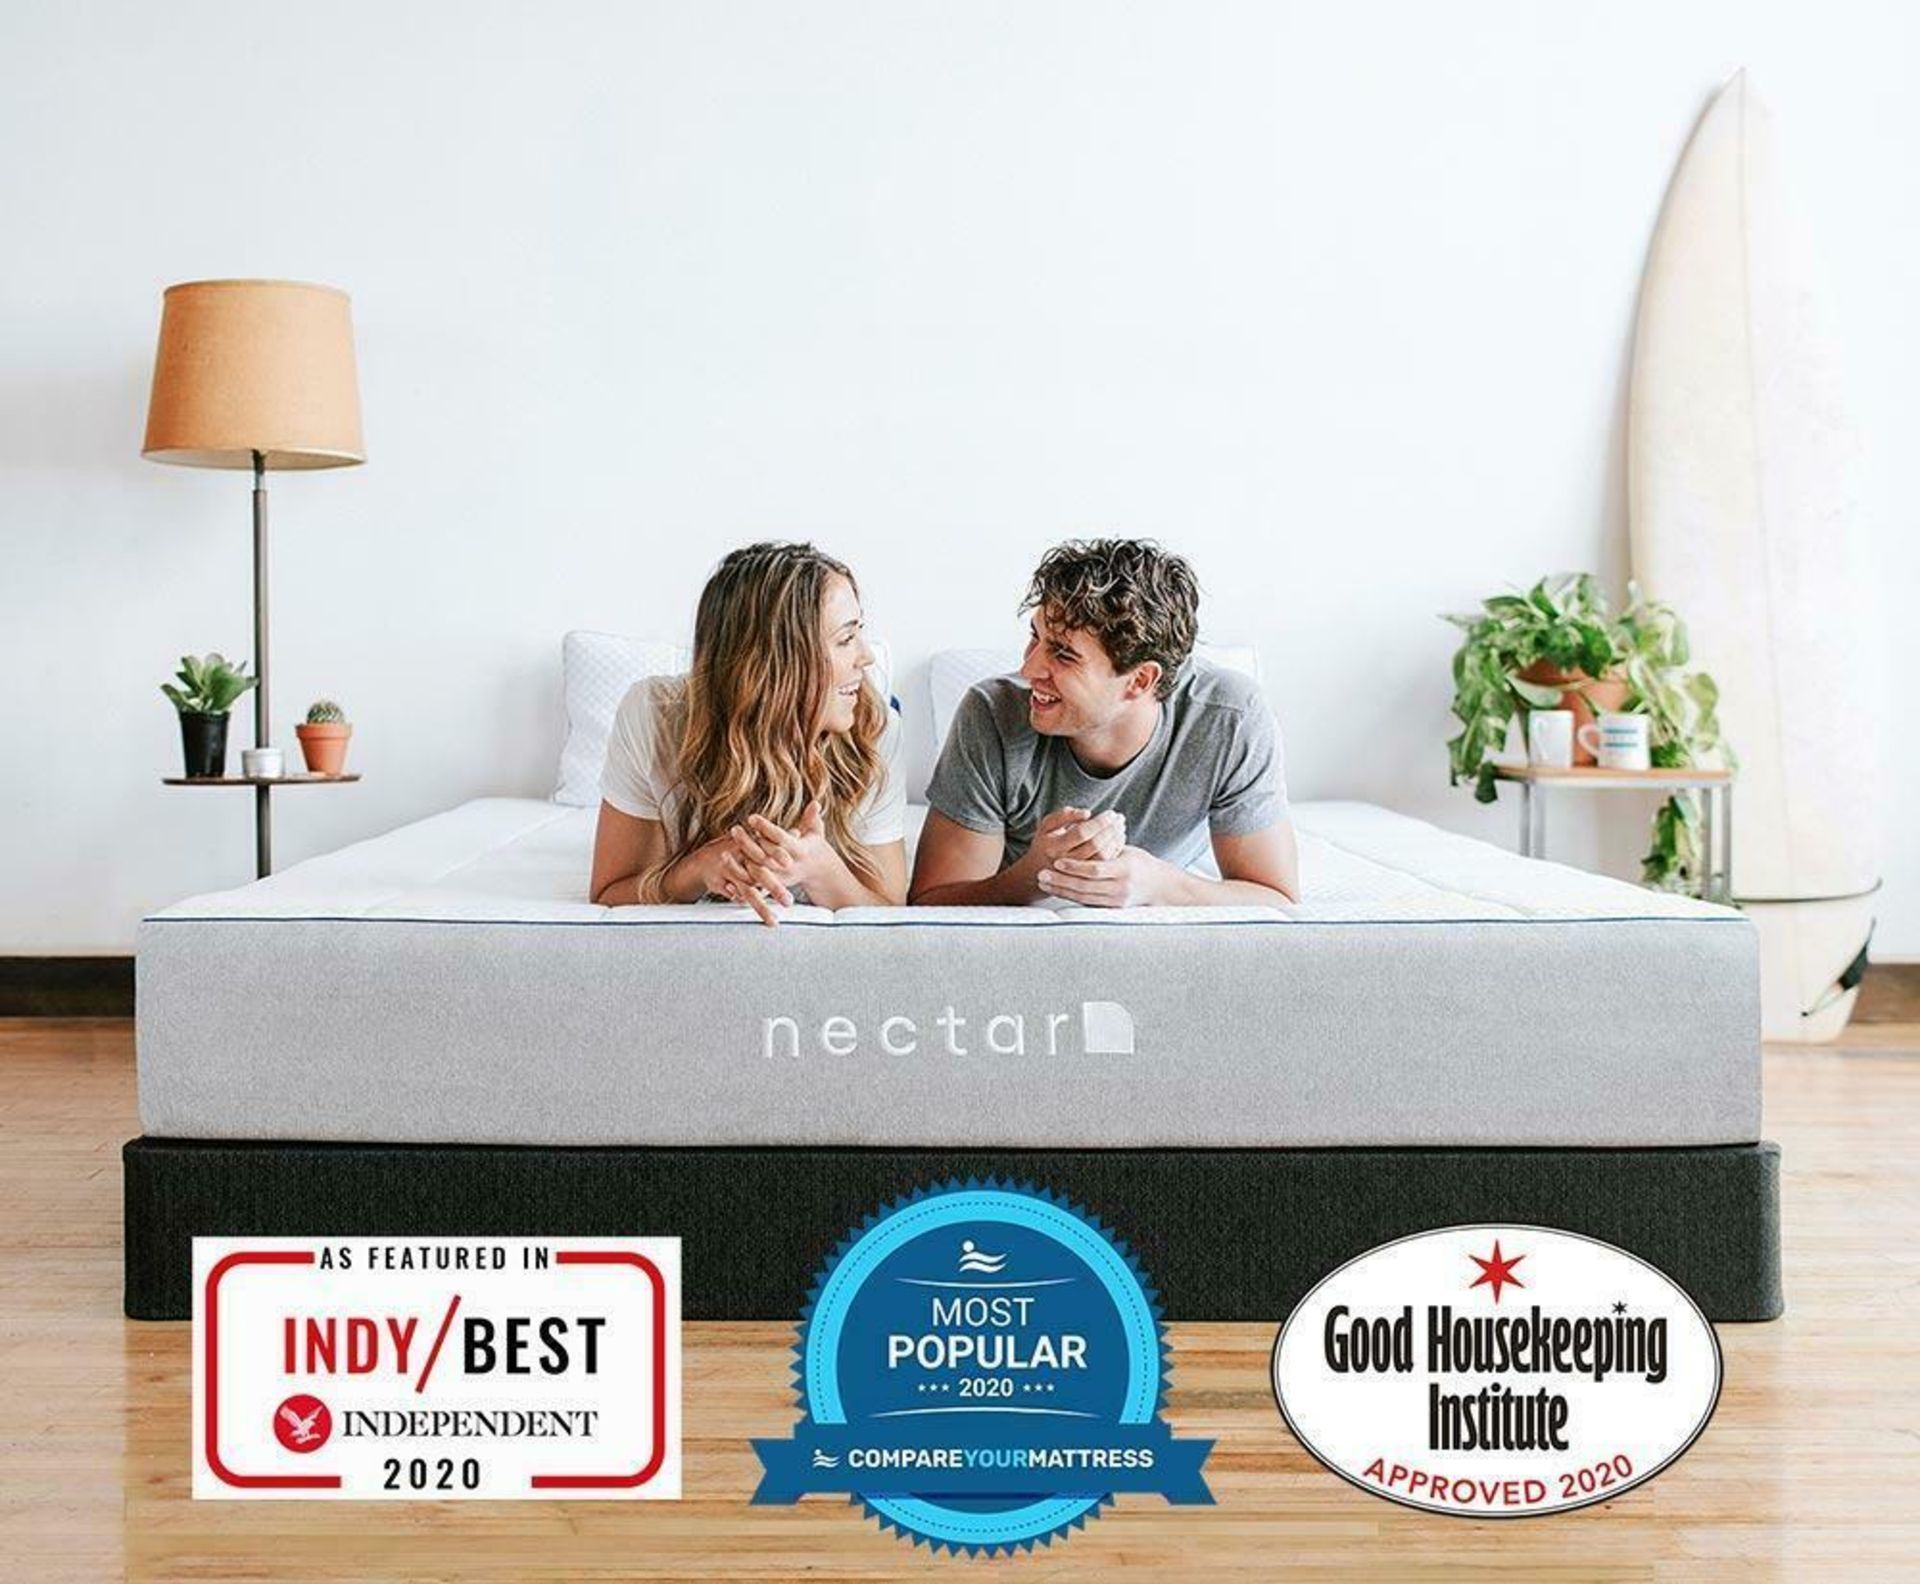 x1| 4ft 6 Nectar Professionally Refurbished Smart Pressure Relieving Memory Foam Mattress|RRP £569|